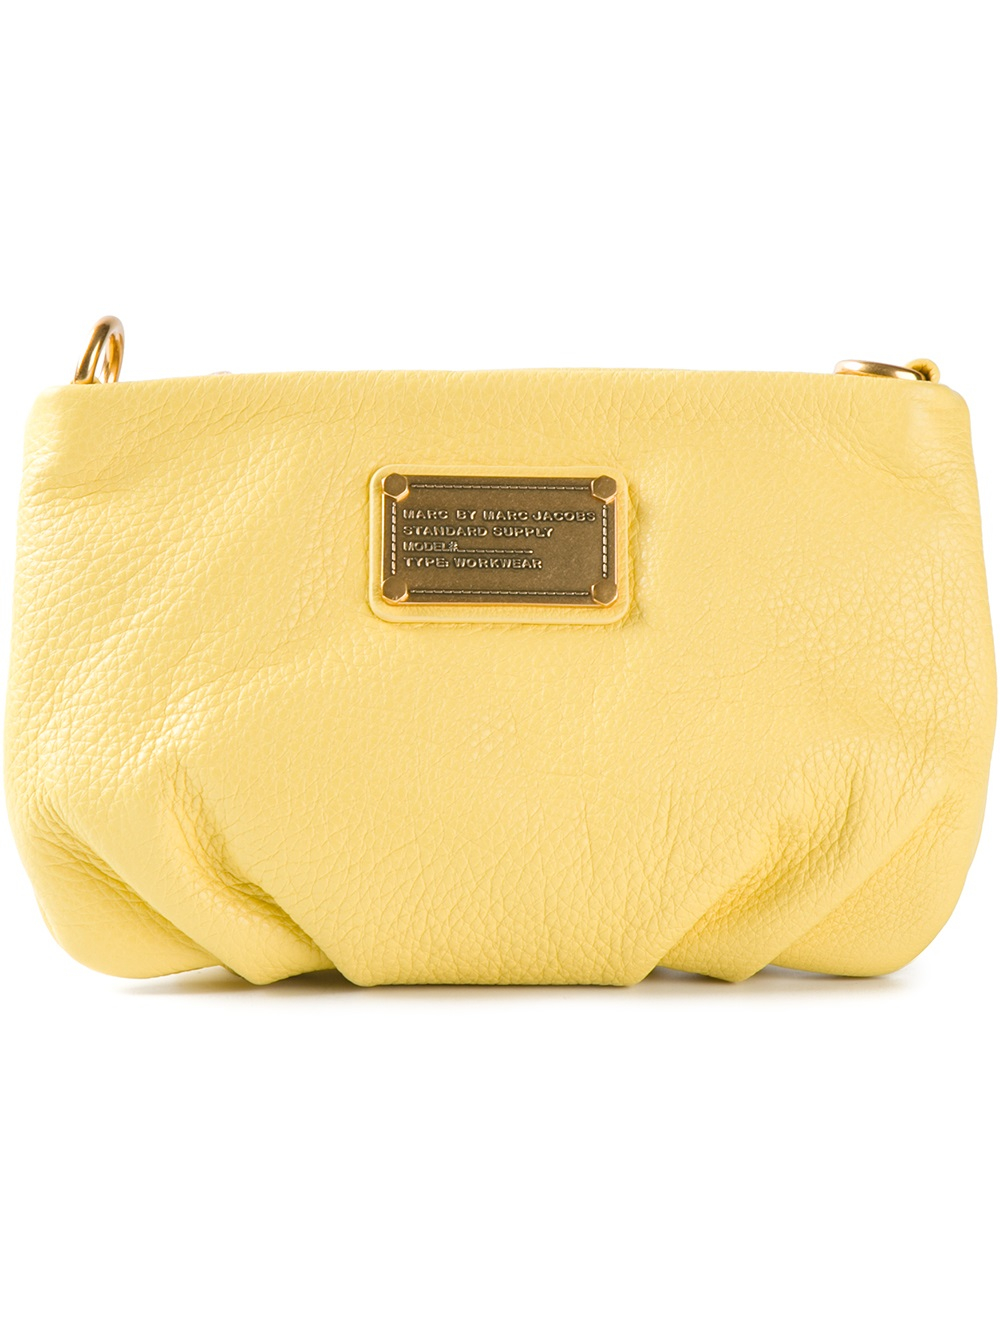 Marc By Marc Jacobs Classic Q Percy Crossbody Bag in Yellow | Lyst